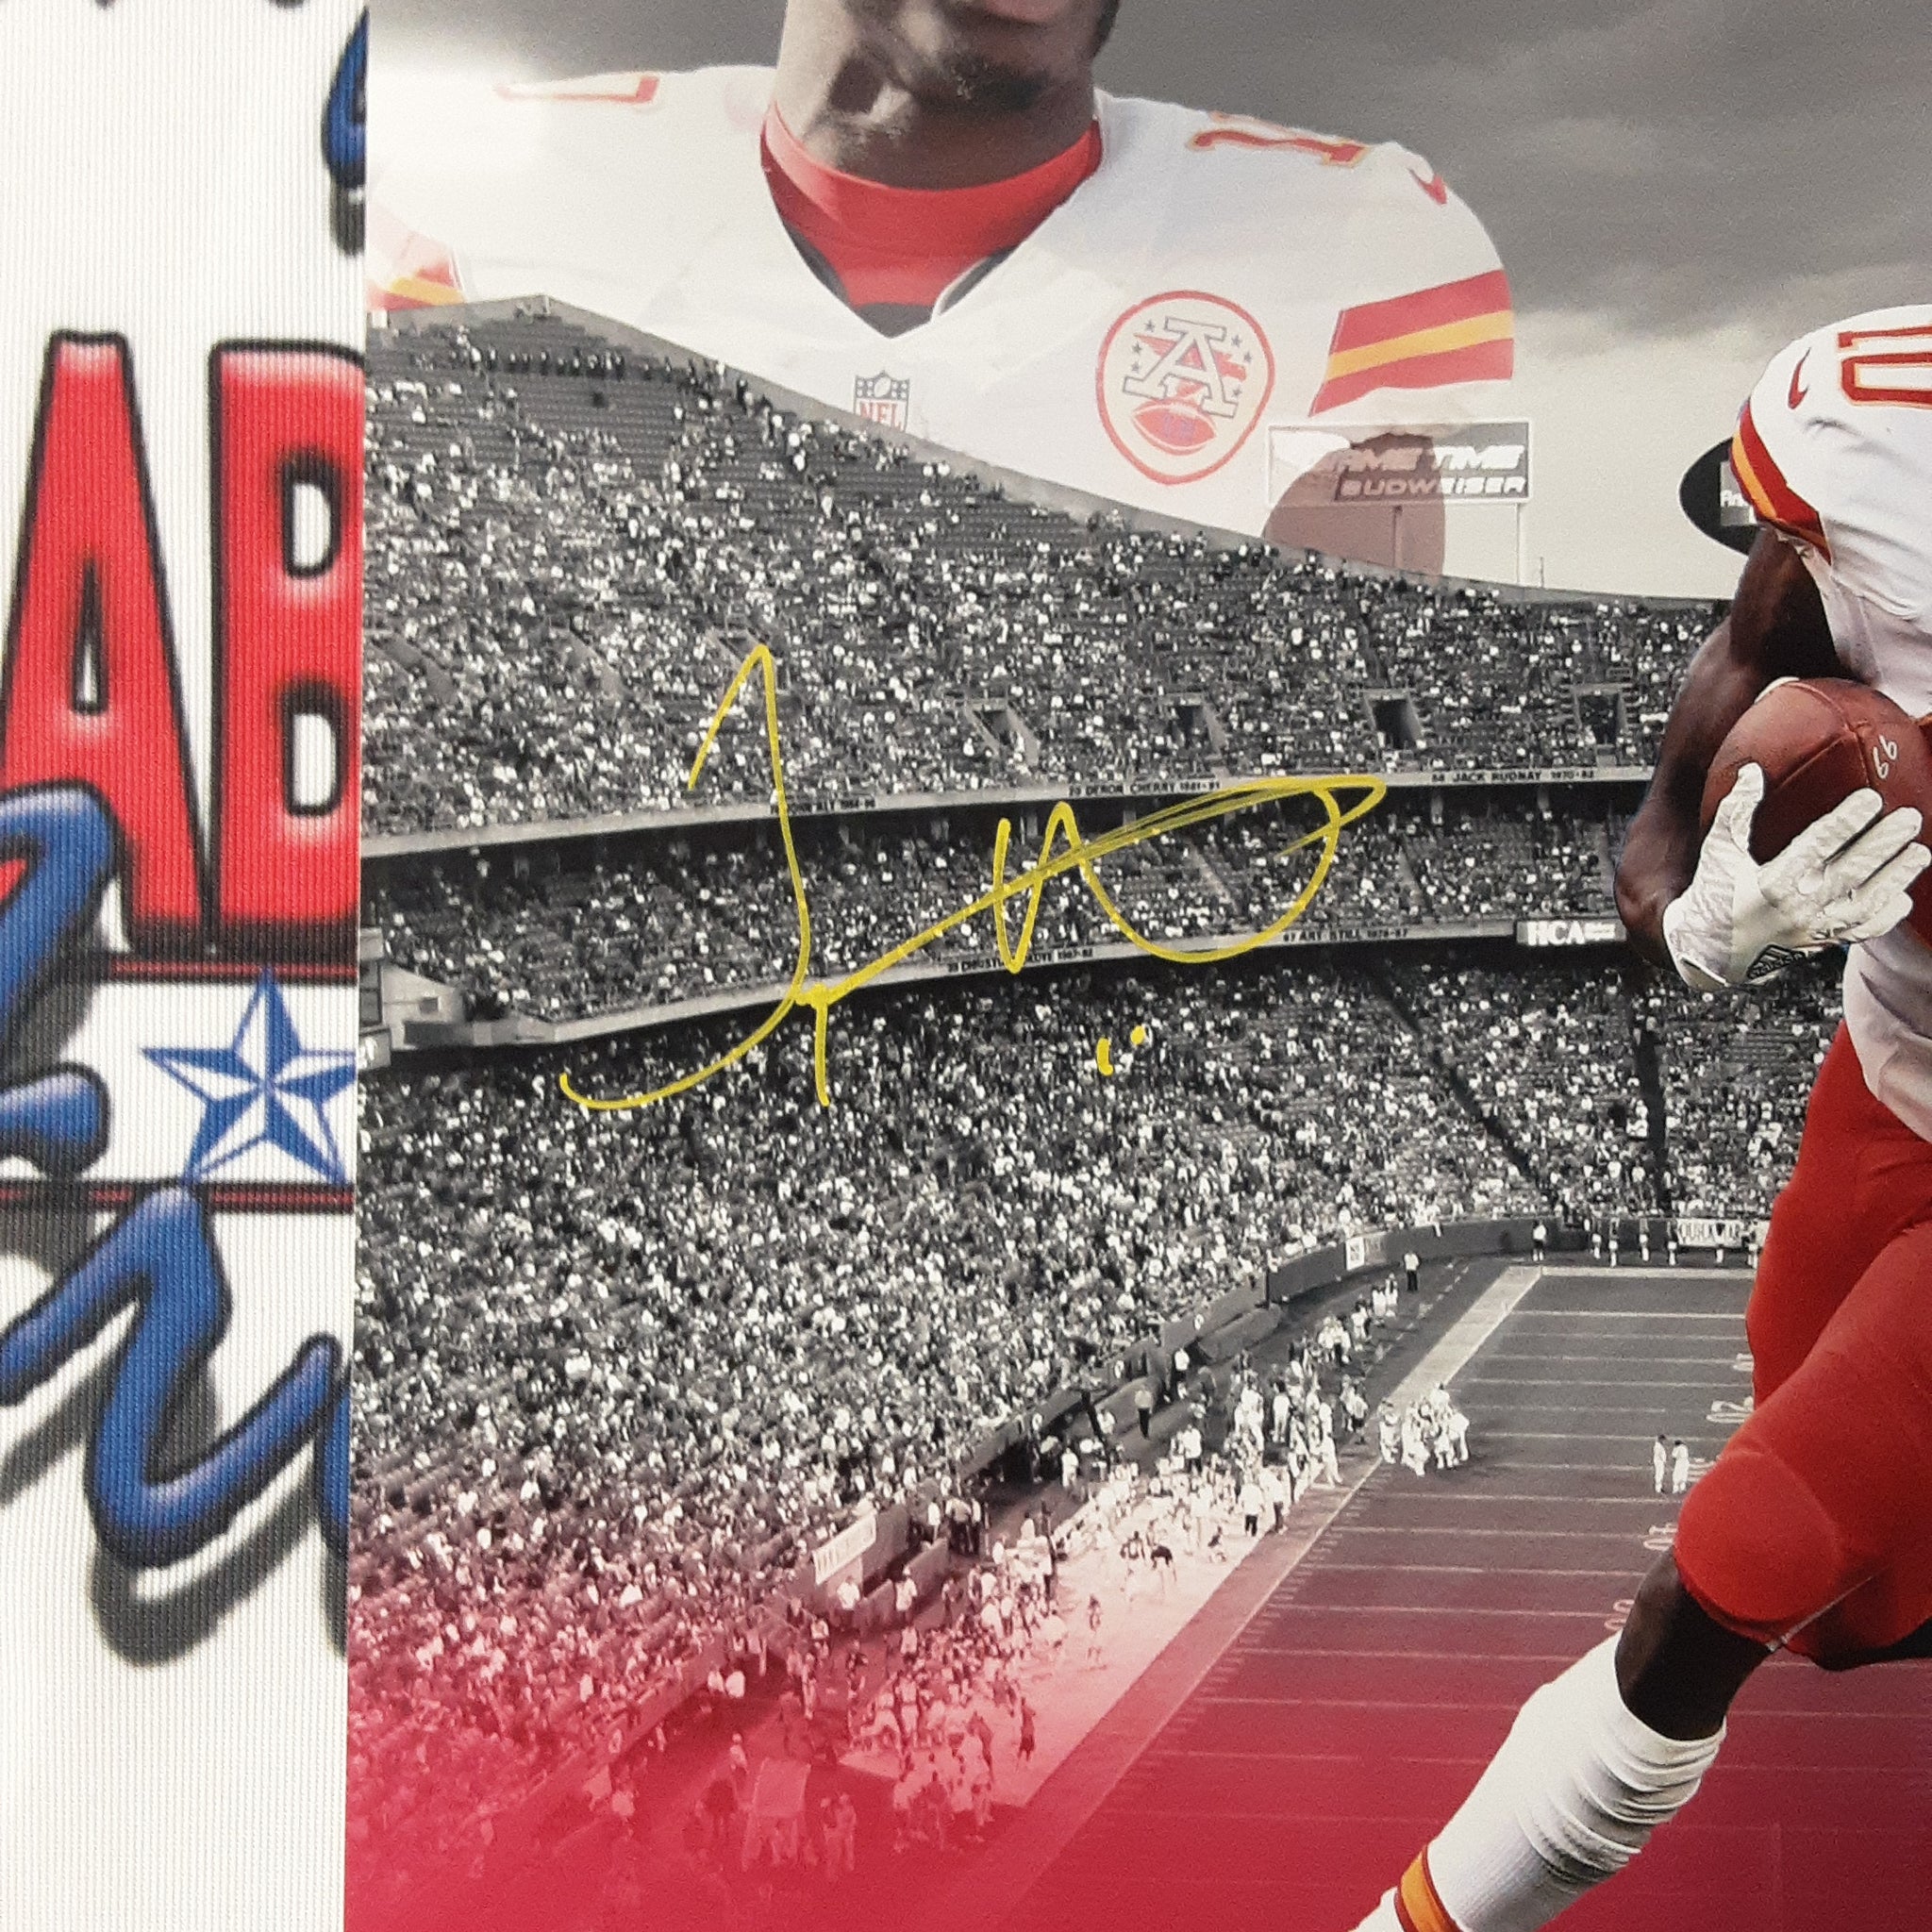 Tyreek Hill Authentic Signed 11x14 Photo Autographed JSA.